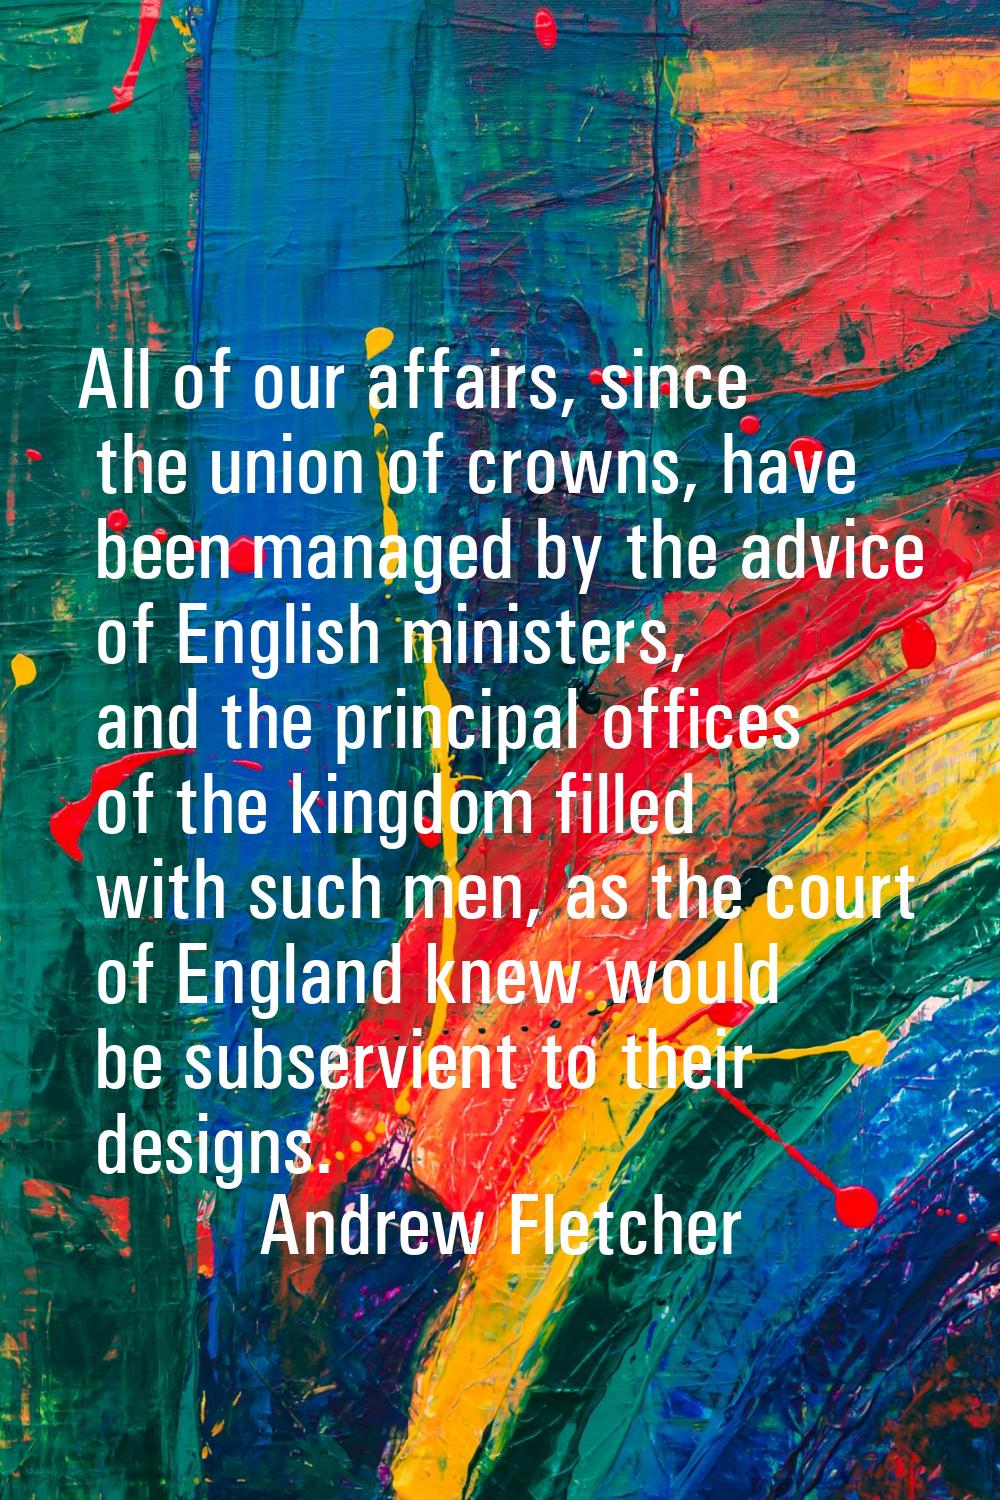 All of our affairs, since the union of crowns, have been managed by the advice of English ministers